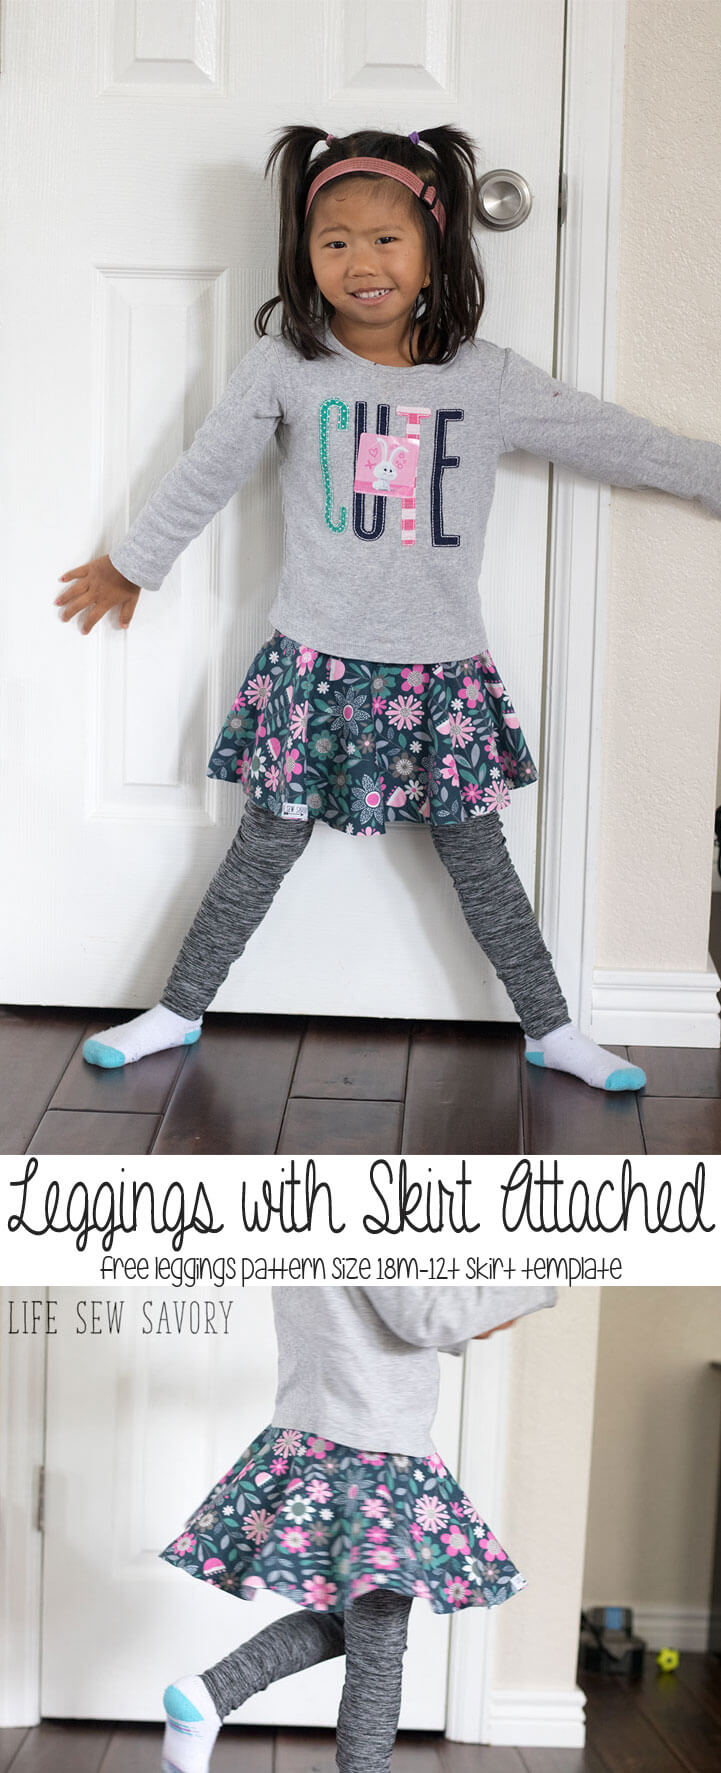 Free Knitting Patterns For Teens Free Classic Legging Pattern For Girls 18 Mths 12 Years Life Sew